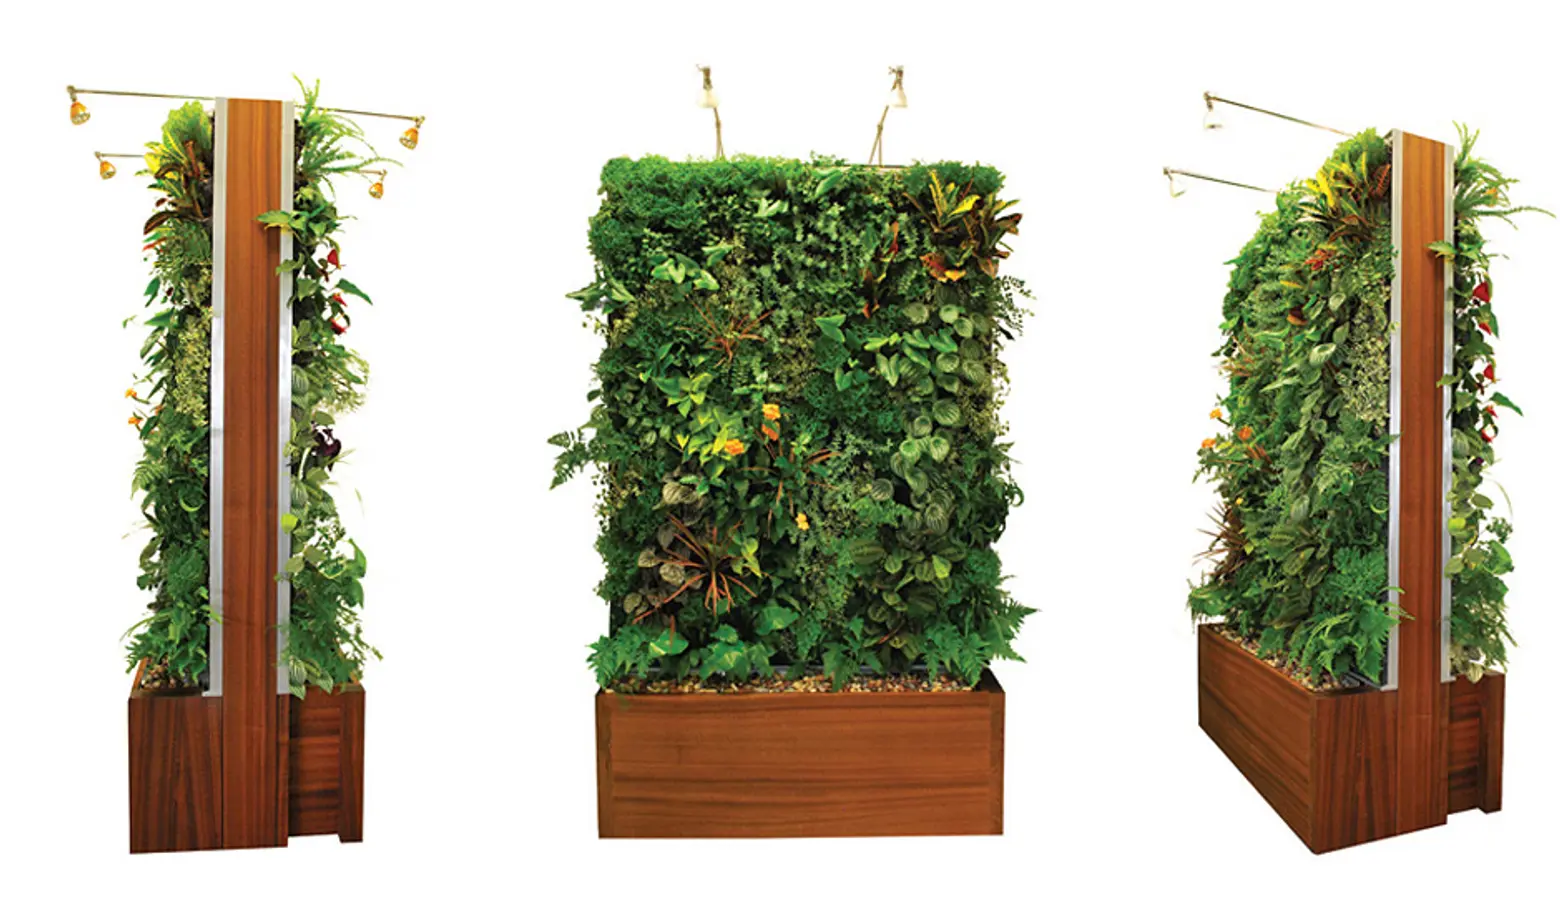 Easily Outfit Your Home in Greenery with Plant Wall Design’s Vertical Garden